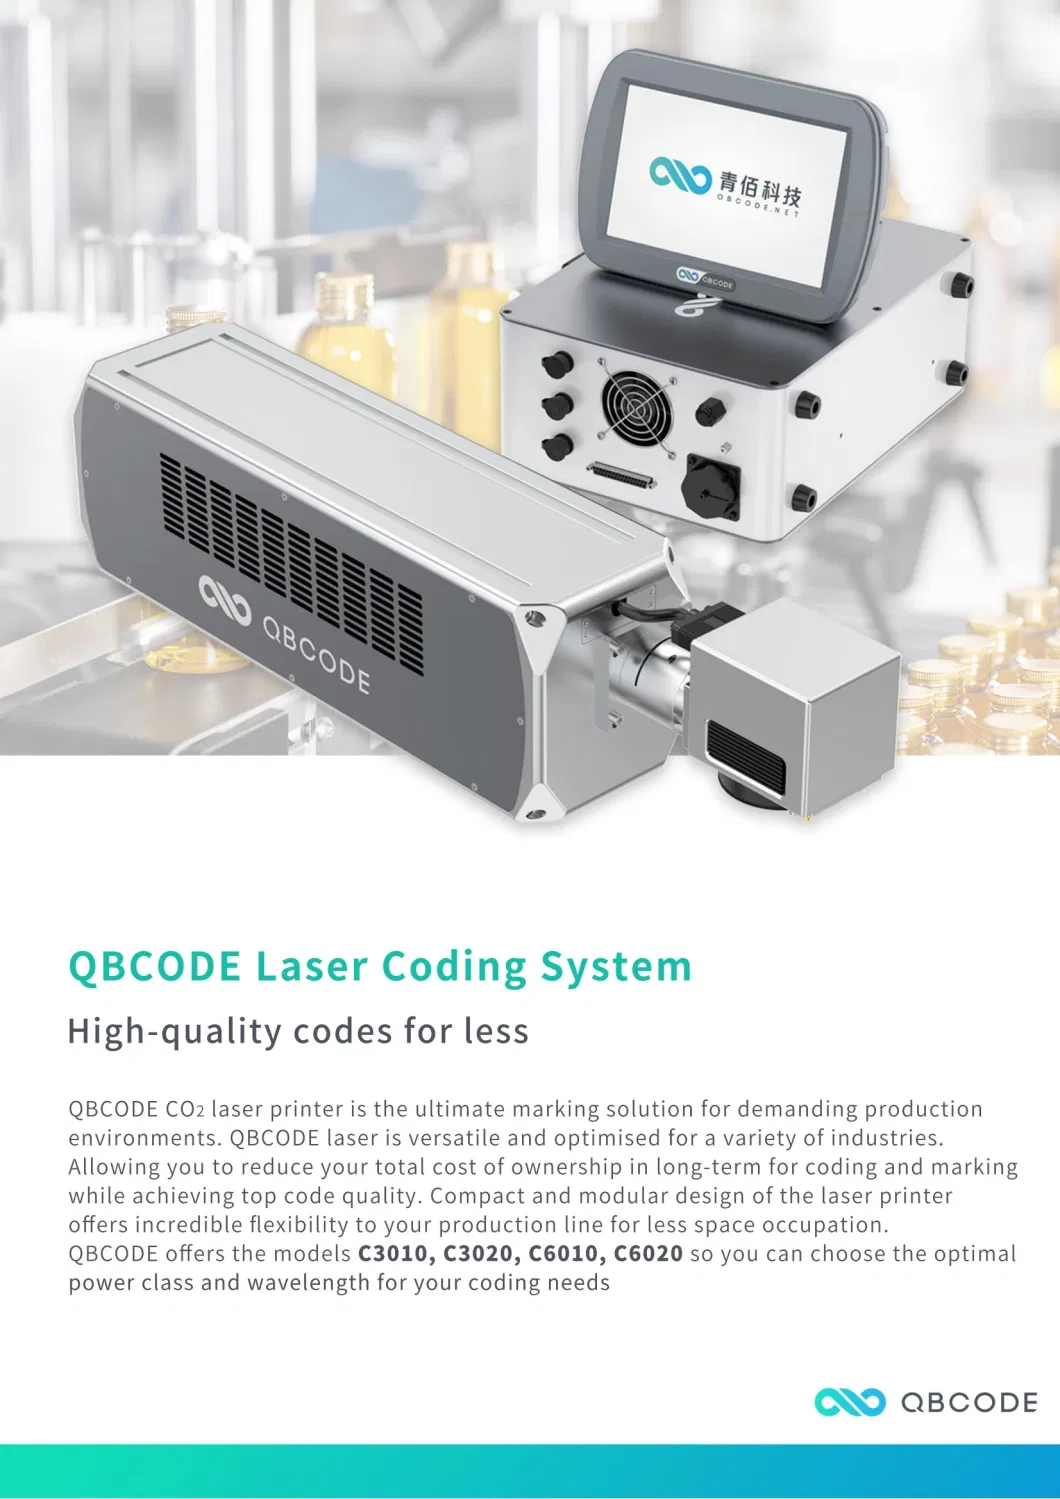 Qbcode C2010/C3010 Date Printer 30W Fly CO2 Laser Marking Printing Machine for PVC Pipe, Metal, Plastic with CE Certification